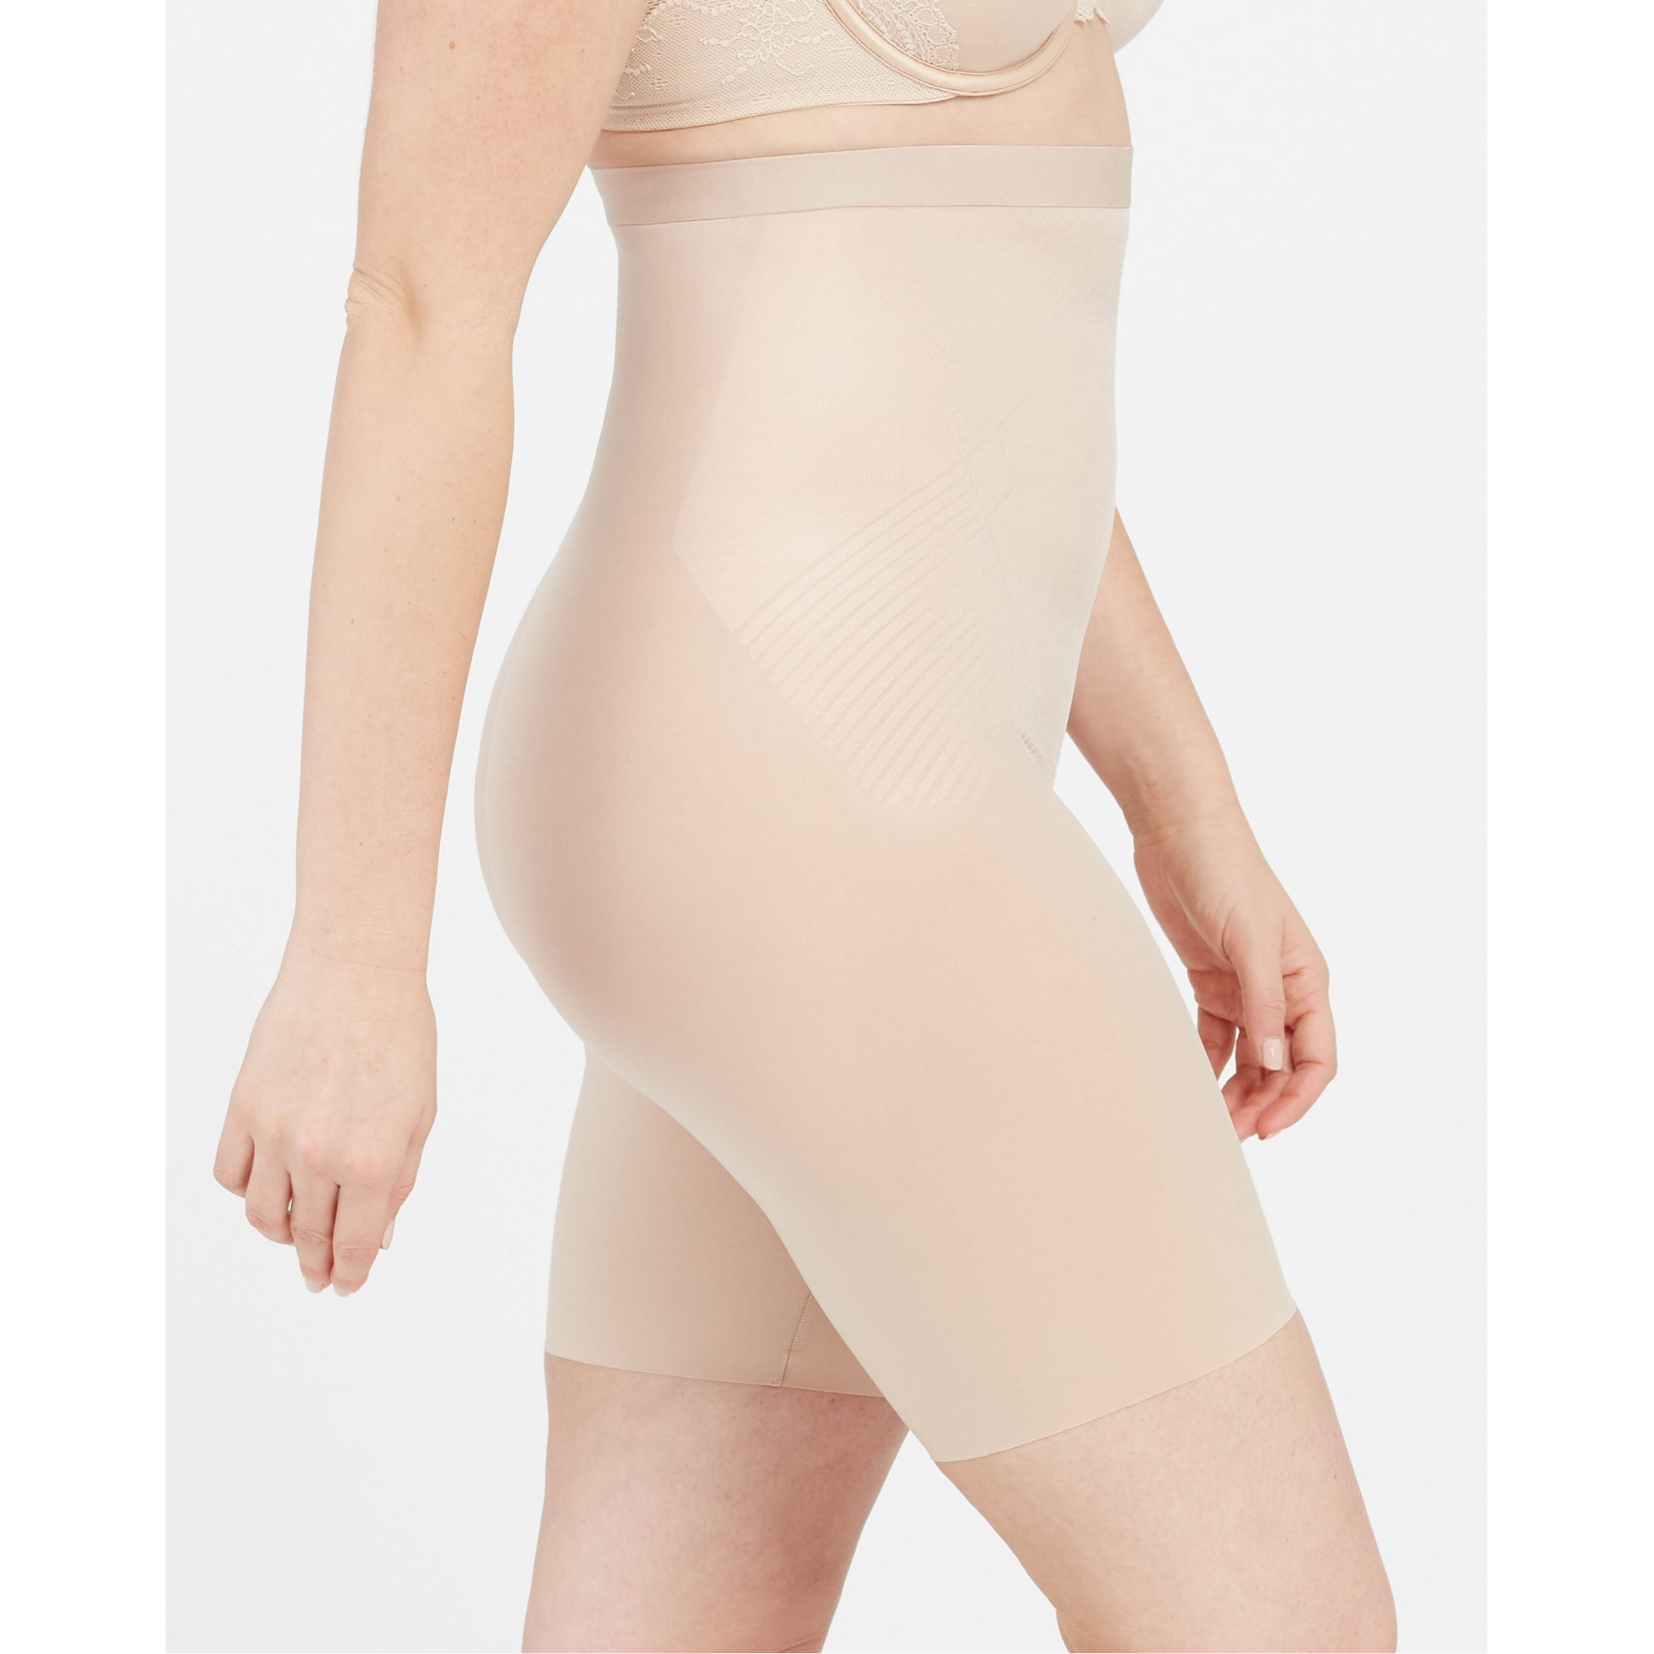 SPANX - Our new Thinstincts 2.0 collection is pure #SpanxMagic! With an  anti-chafing design that is a total thigh-saver, Thinstincts 2.0 is perfect  for everyday wear. ❤️ #SPANX #Shapewear Shop now at